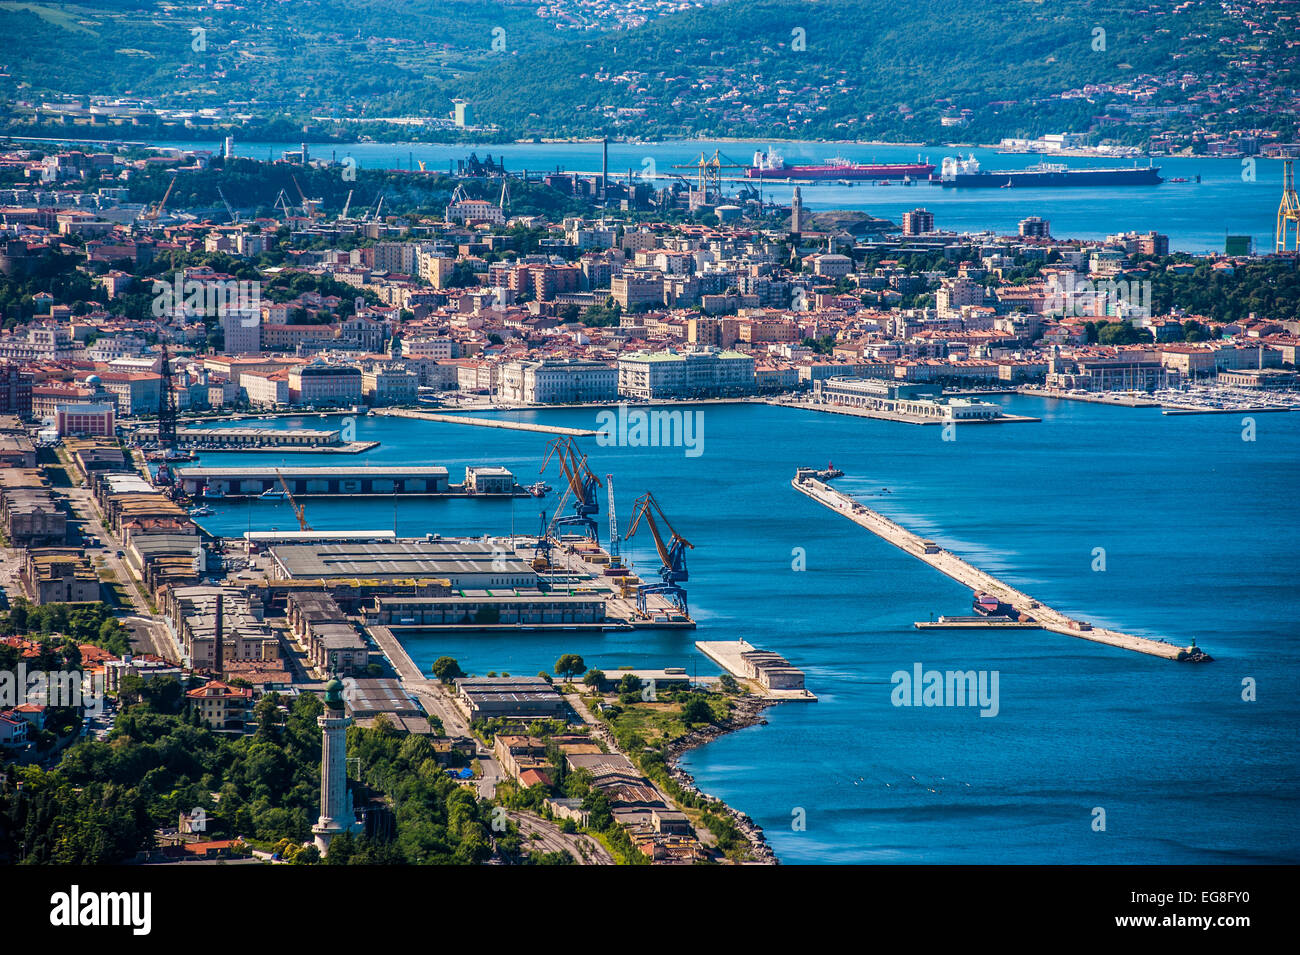 Trieste, Italy - A view of the city, the old port,the lighthouse and the Gulf of Trieste seen from a high vantage point. Stock Photo